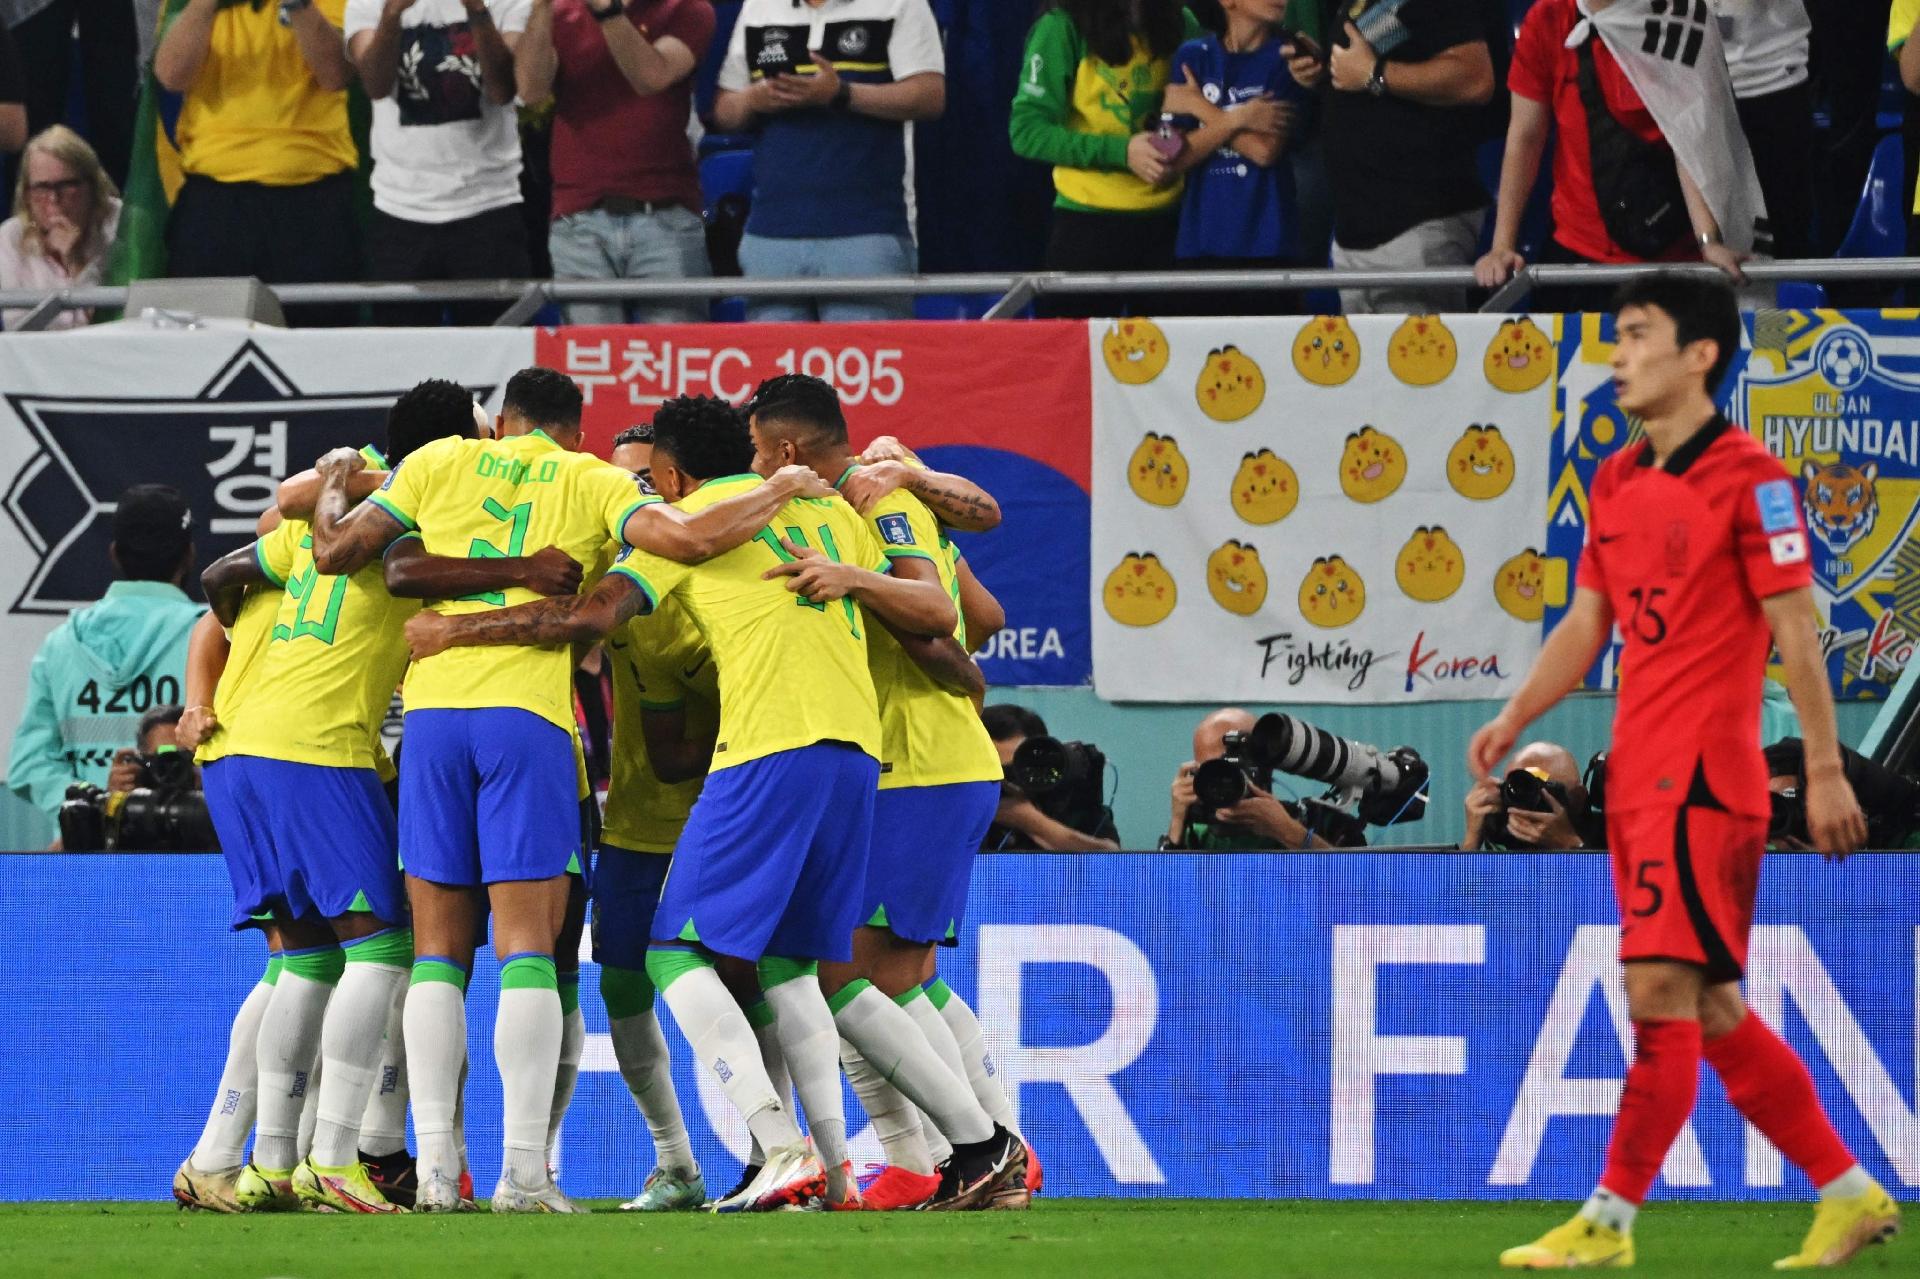 Brazil players celebrate a goal against Korea in the World Cup - NELSON ALMEIDA / AFP